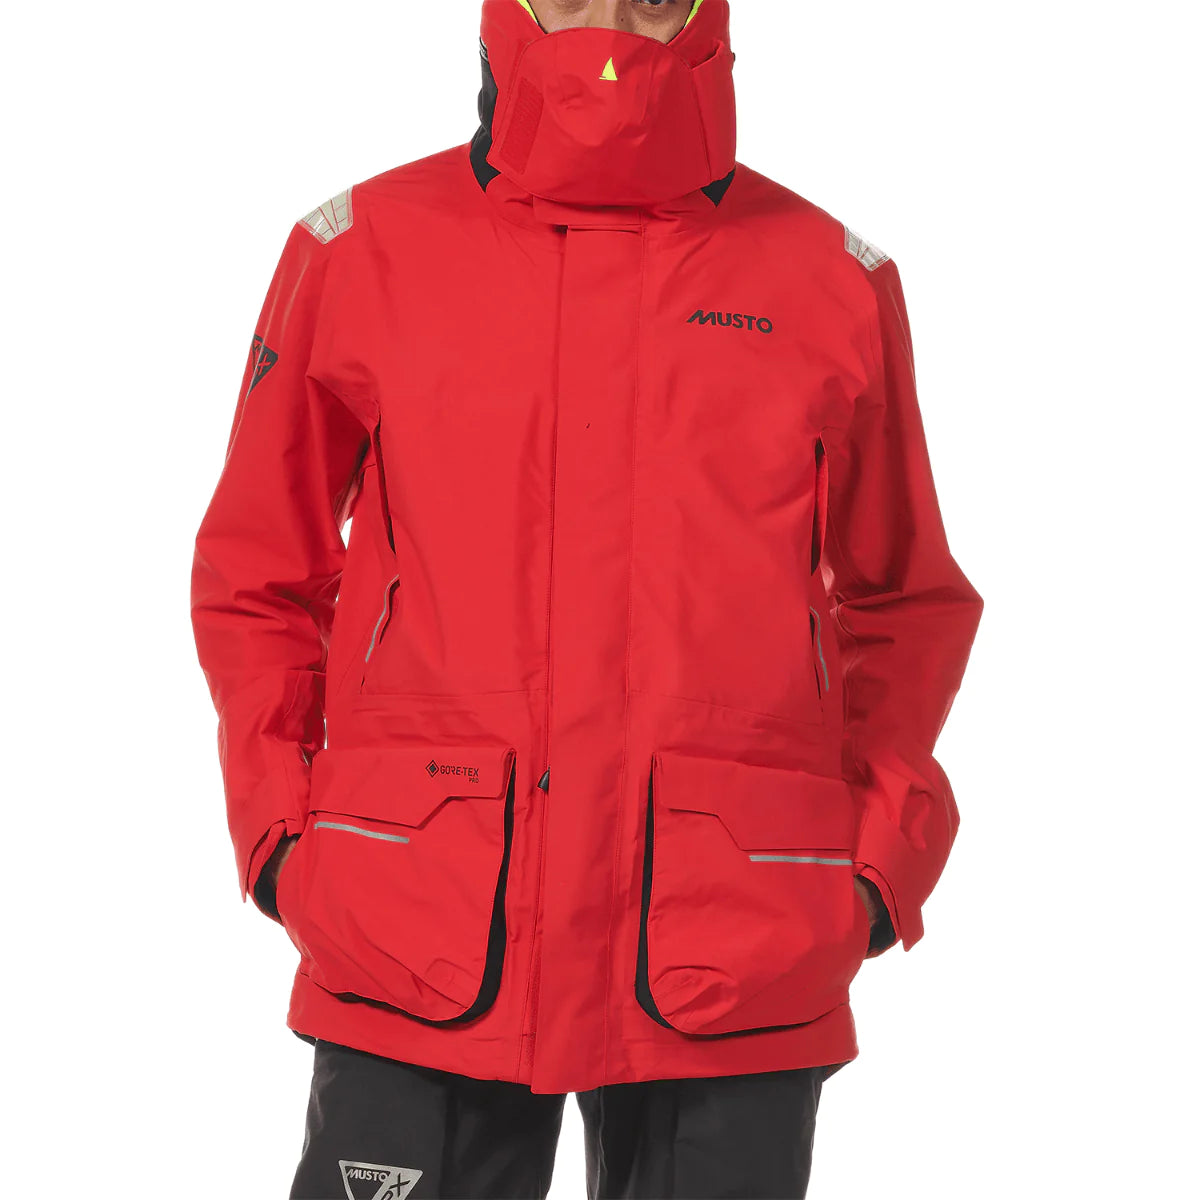 MUSTO MEN'S MPX GORE-TEX PRO OFFSHORE JACKET 2.0 RED